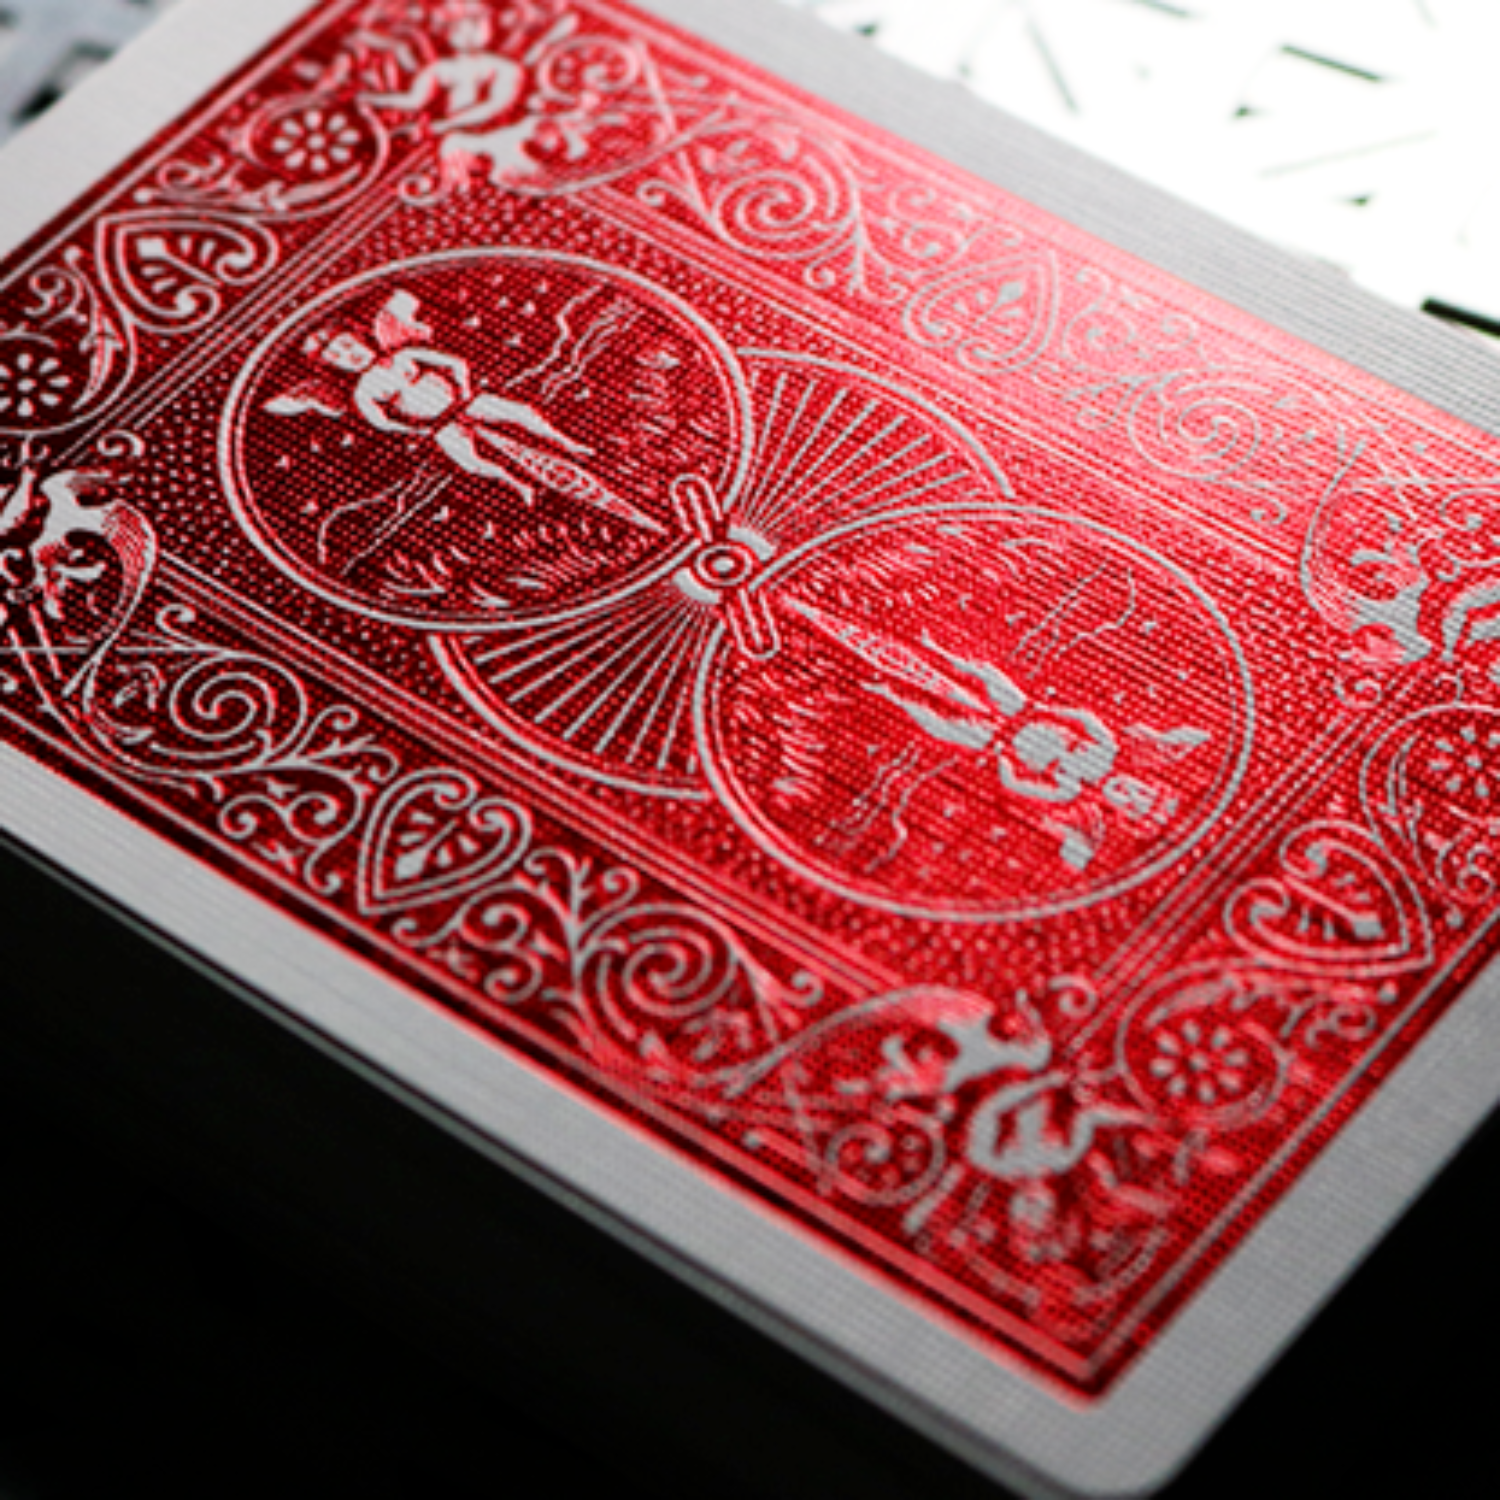 [Red 크림슨럭스 V2] Bicycle Rider Back Crimson Luxe (Red) Version 2 by US Playing Card Co